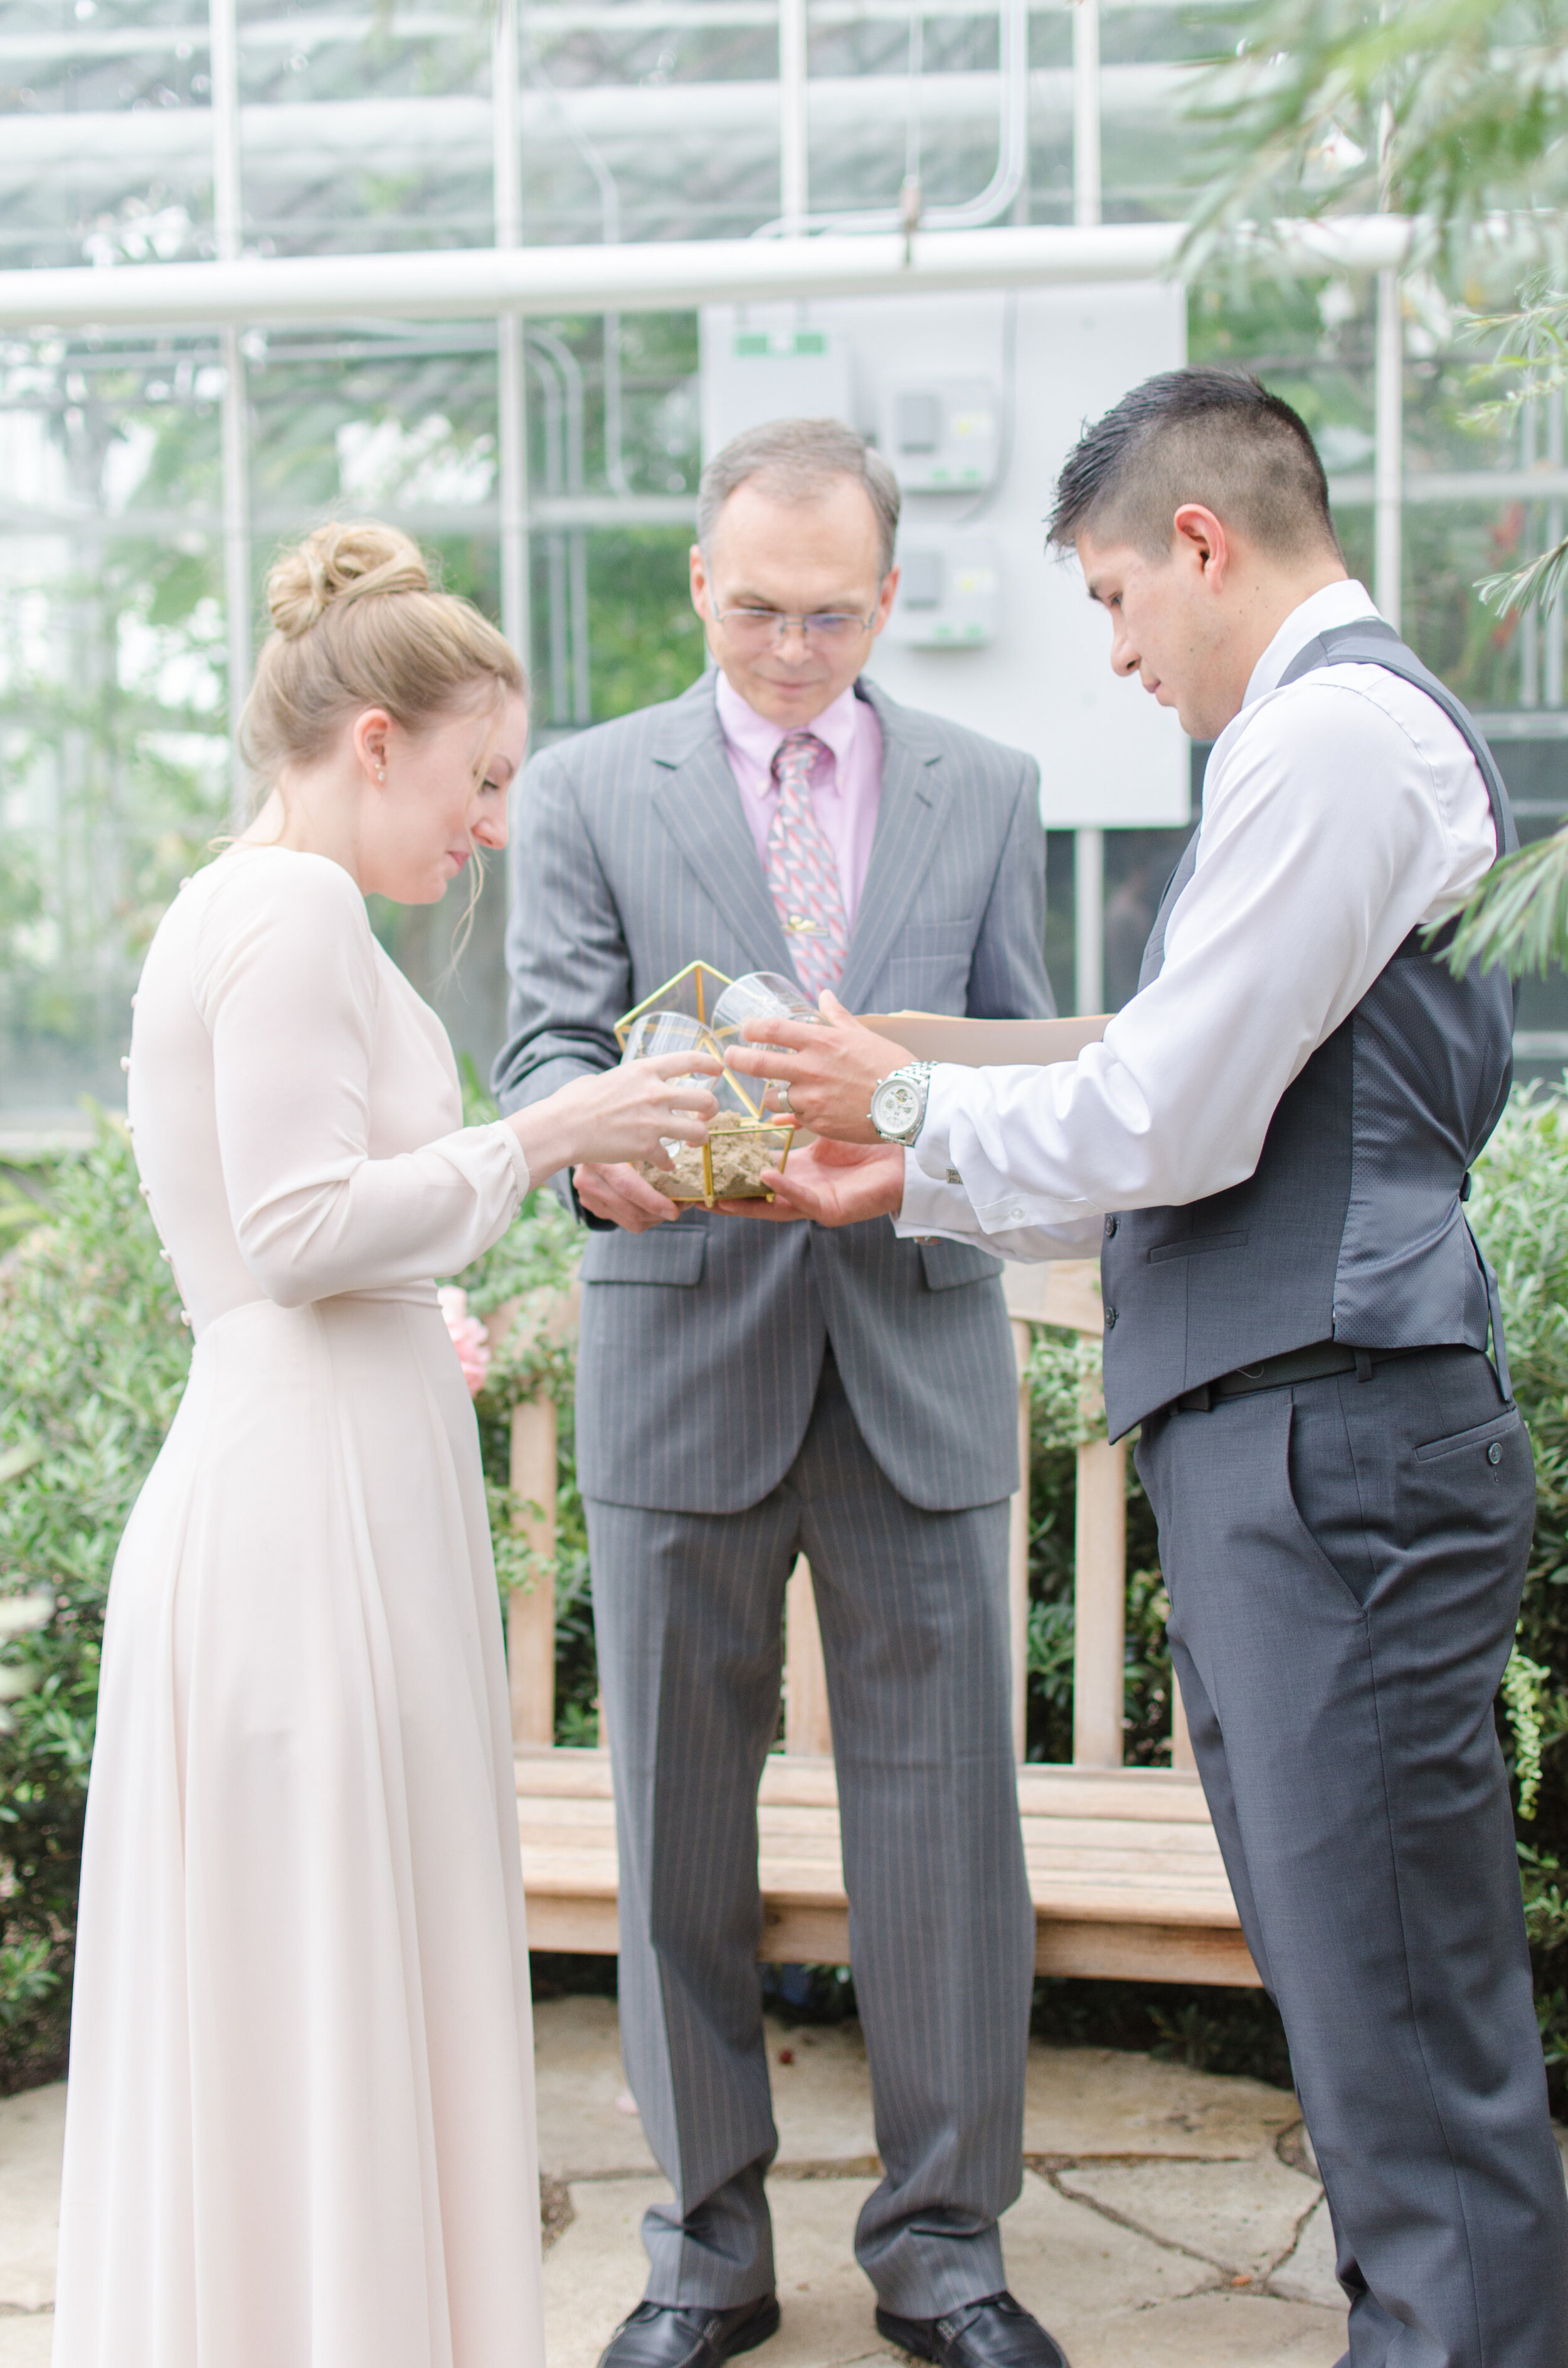 Intimate Oak Park Conservatory Greenhouse Wedding captured by K. Marie Studios. Head to CHItheeWED.com for more wedding ideas!